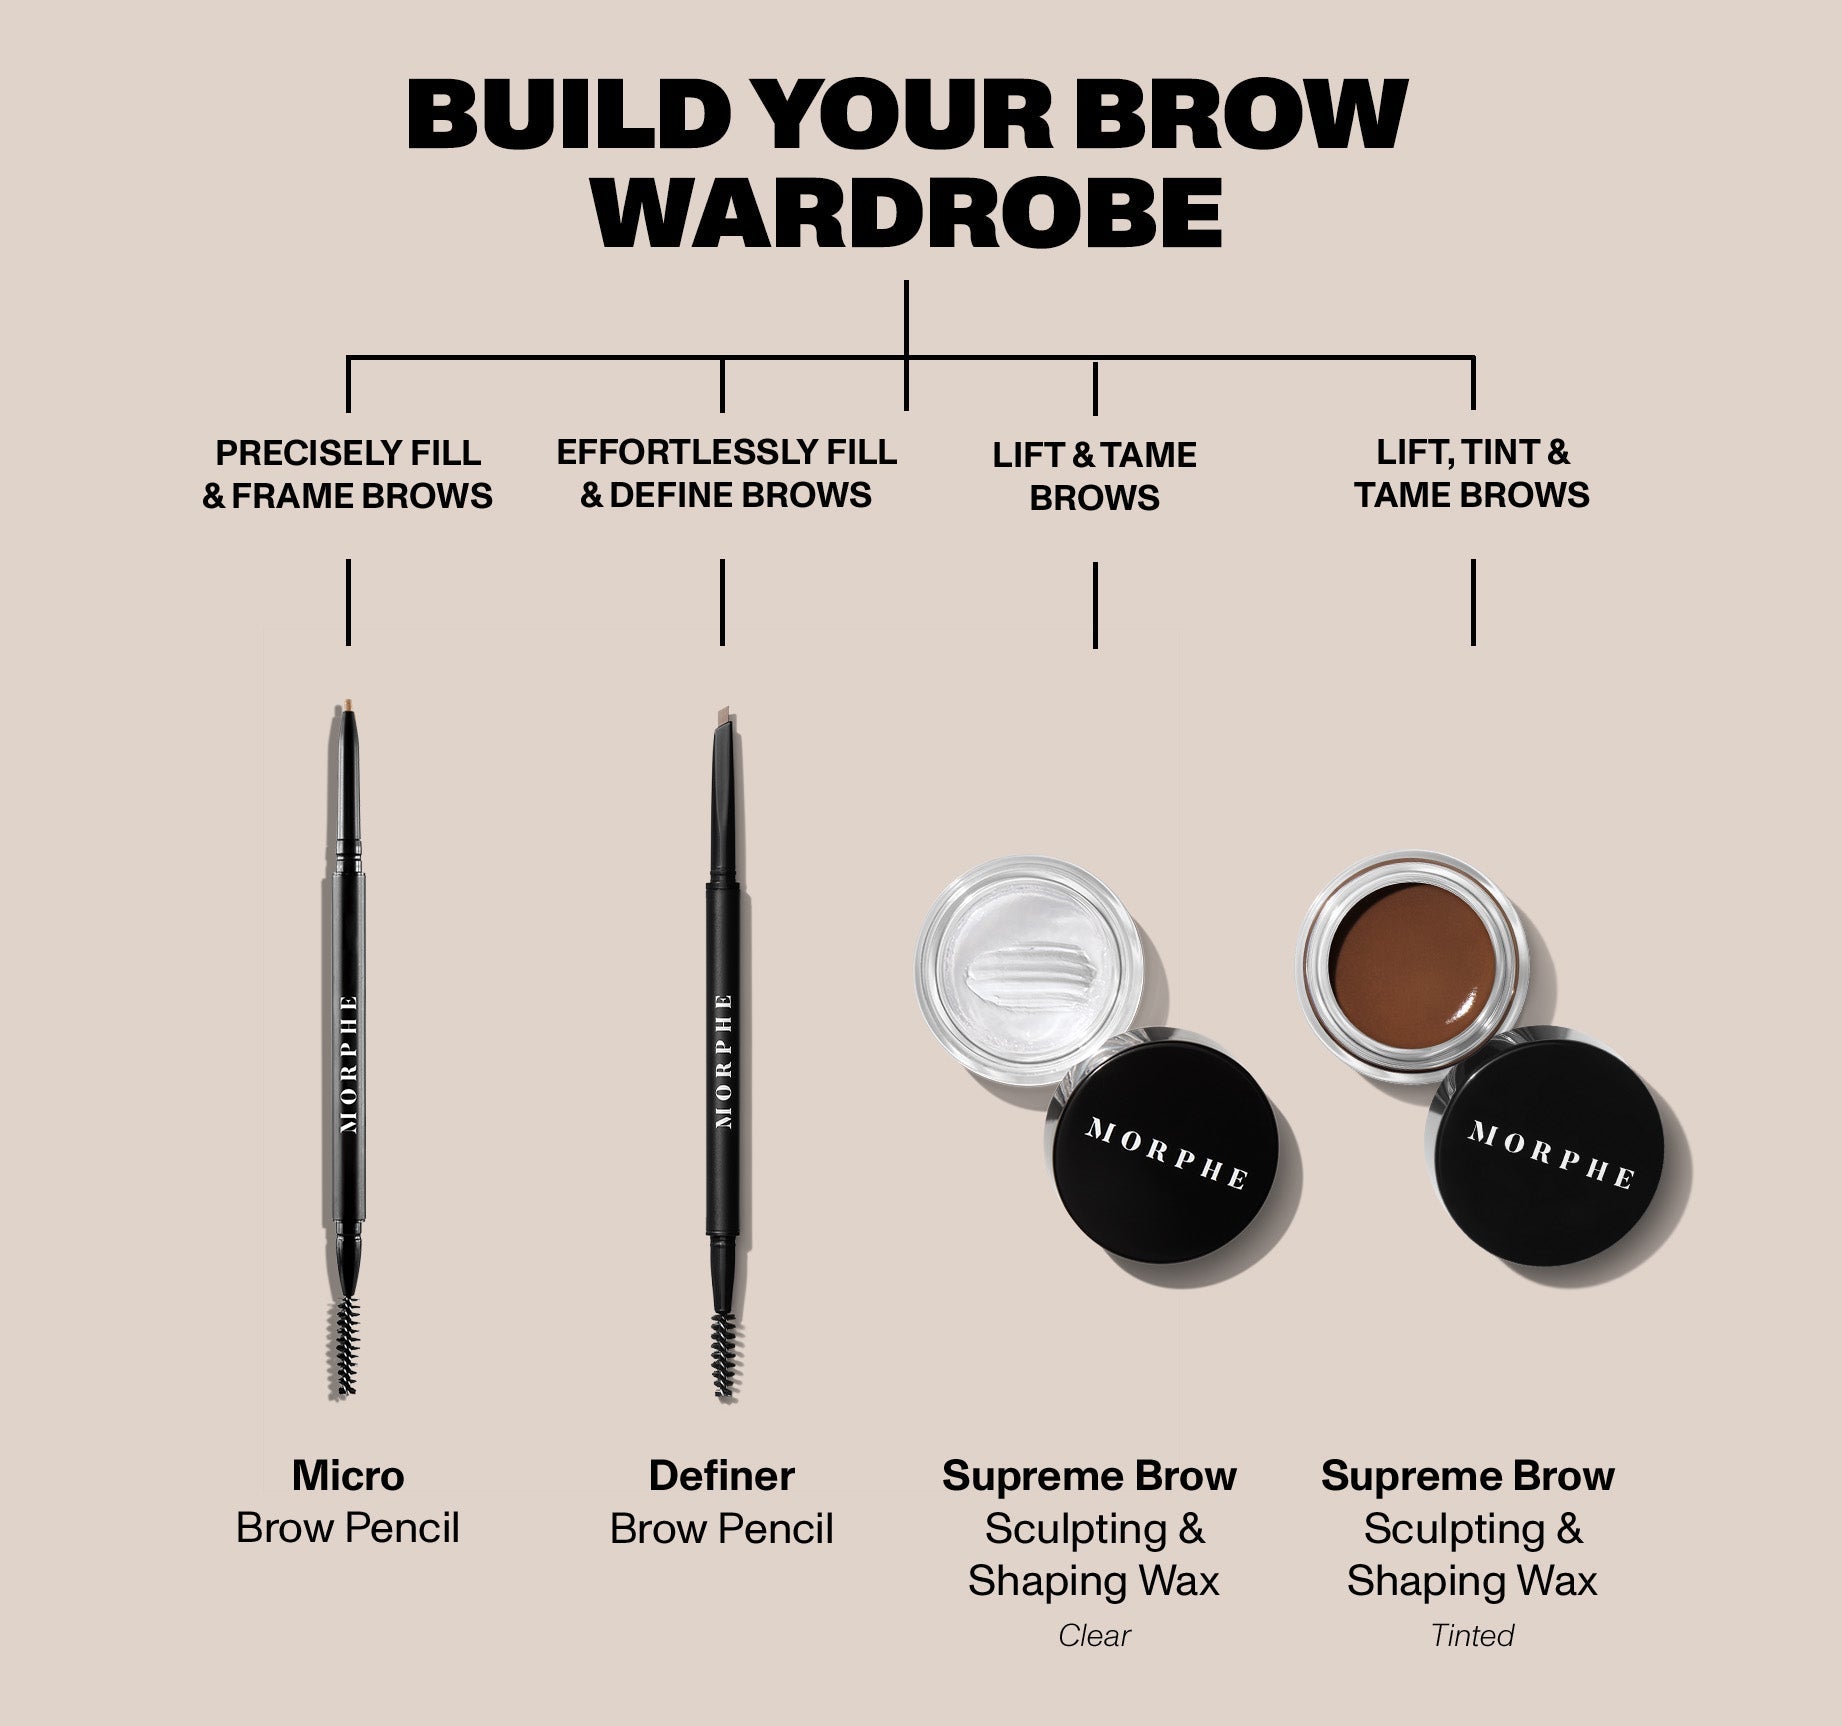 Supreme Brow Sculpting And Shaping Wax - Chocolate Mousse - Image 9